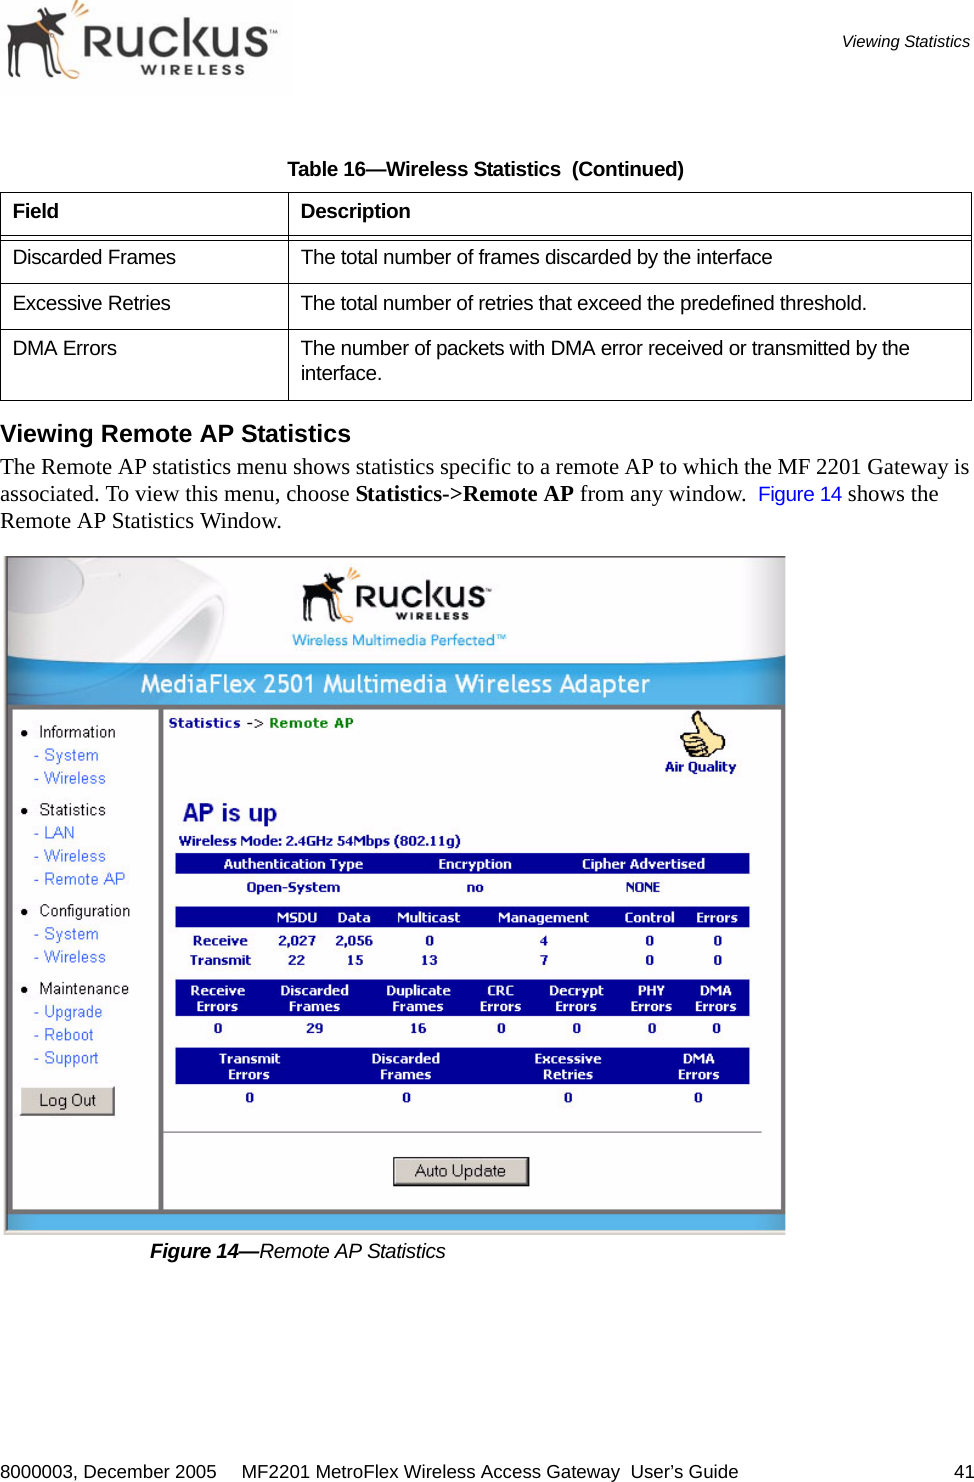 8000003, December 2005  MF2201 MetroFlex Wireless Access Gateway  User’s Guide 41Viewing Statistics Viewing Remote AP StatisticsThe Remote AP statistics menu shows statistics specific to a remote AP to which the MF 2201 Gateway is associated. To view this menu, choose Statistics-&gt;Remote AP from any window.  Figure 14 shows the Remote AP Statistics Window.Figure 14—Remote AP StatisticsDiscarded Frames The total number of frames discarded by the interfaceExcessive Retries The total number of retries that exceed the predefined threshold. DMA Errors The number of packets with DMA error received or transmitted by the interface.Table 16—Wireless Statistics  (Continued)Field Description